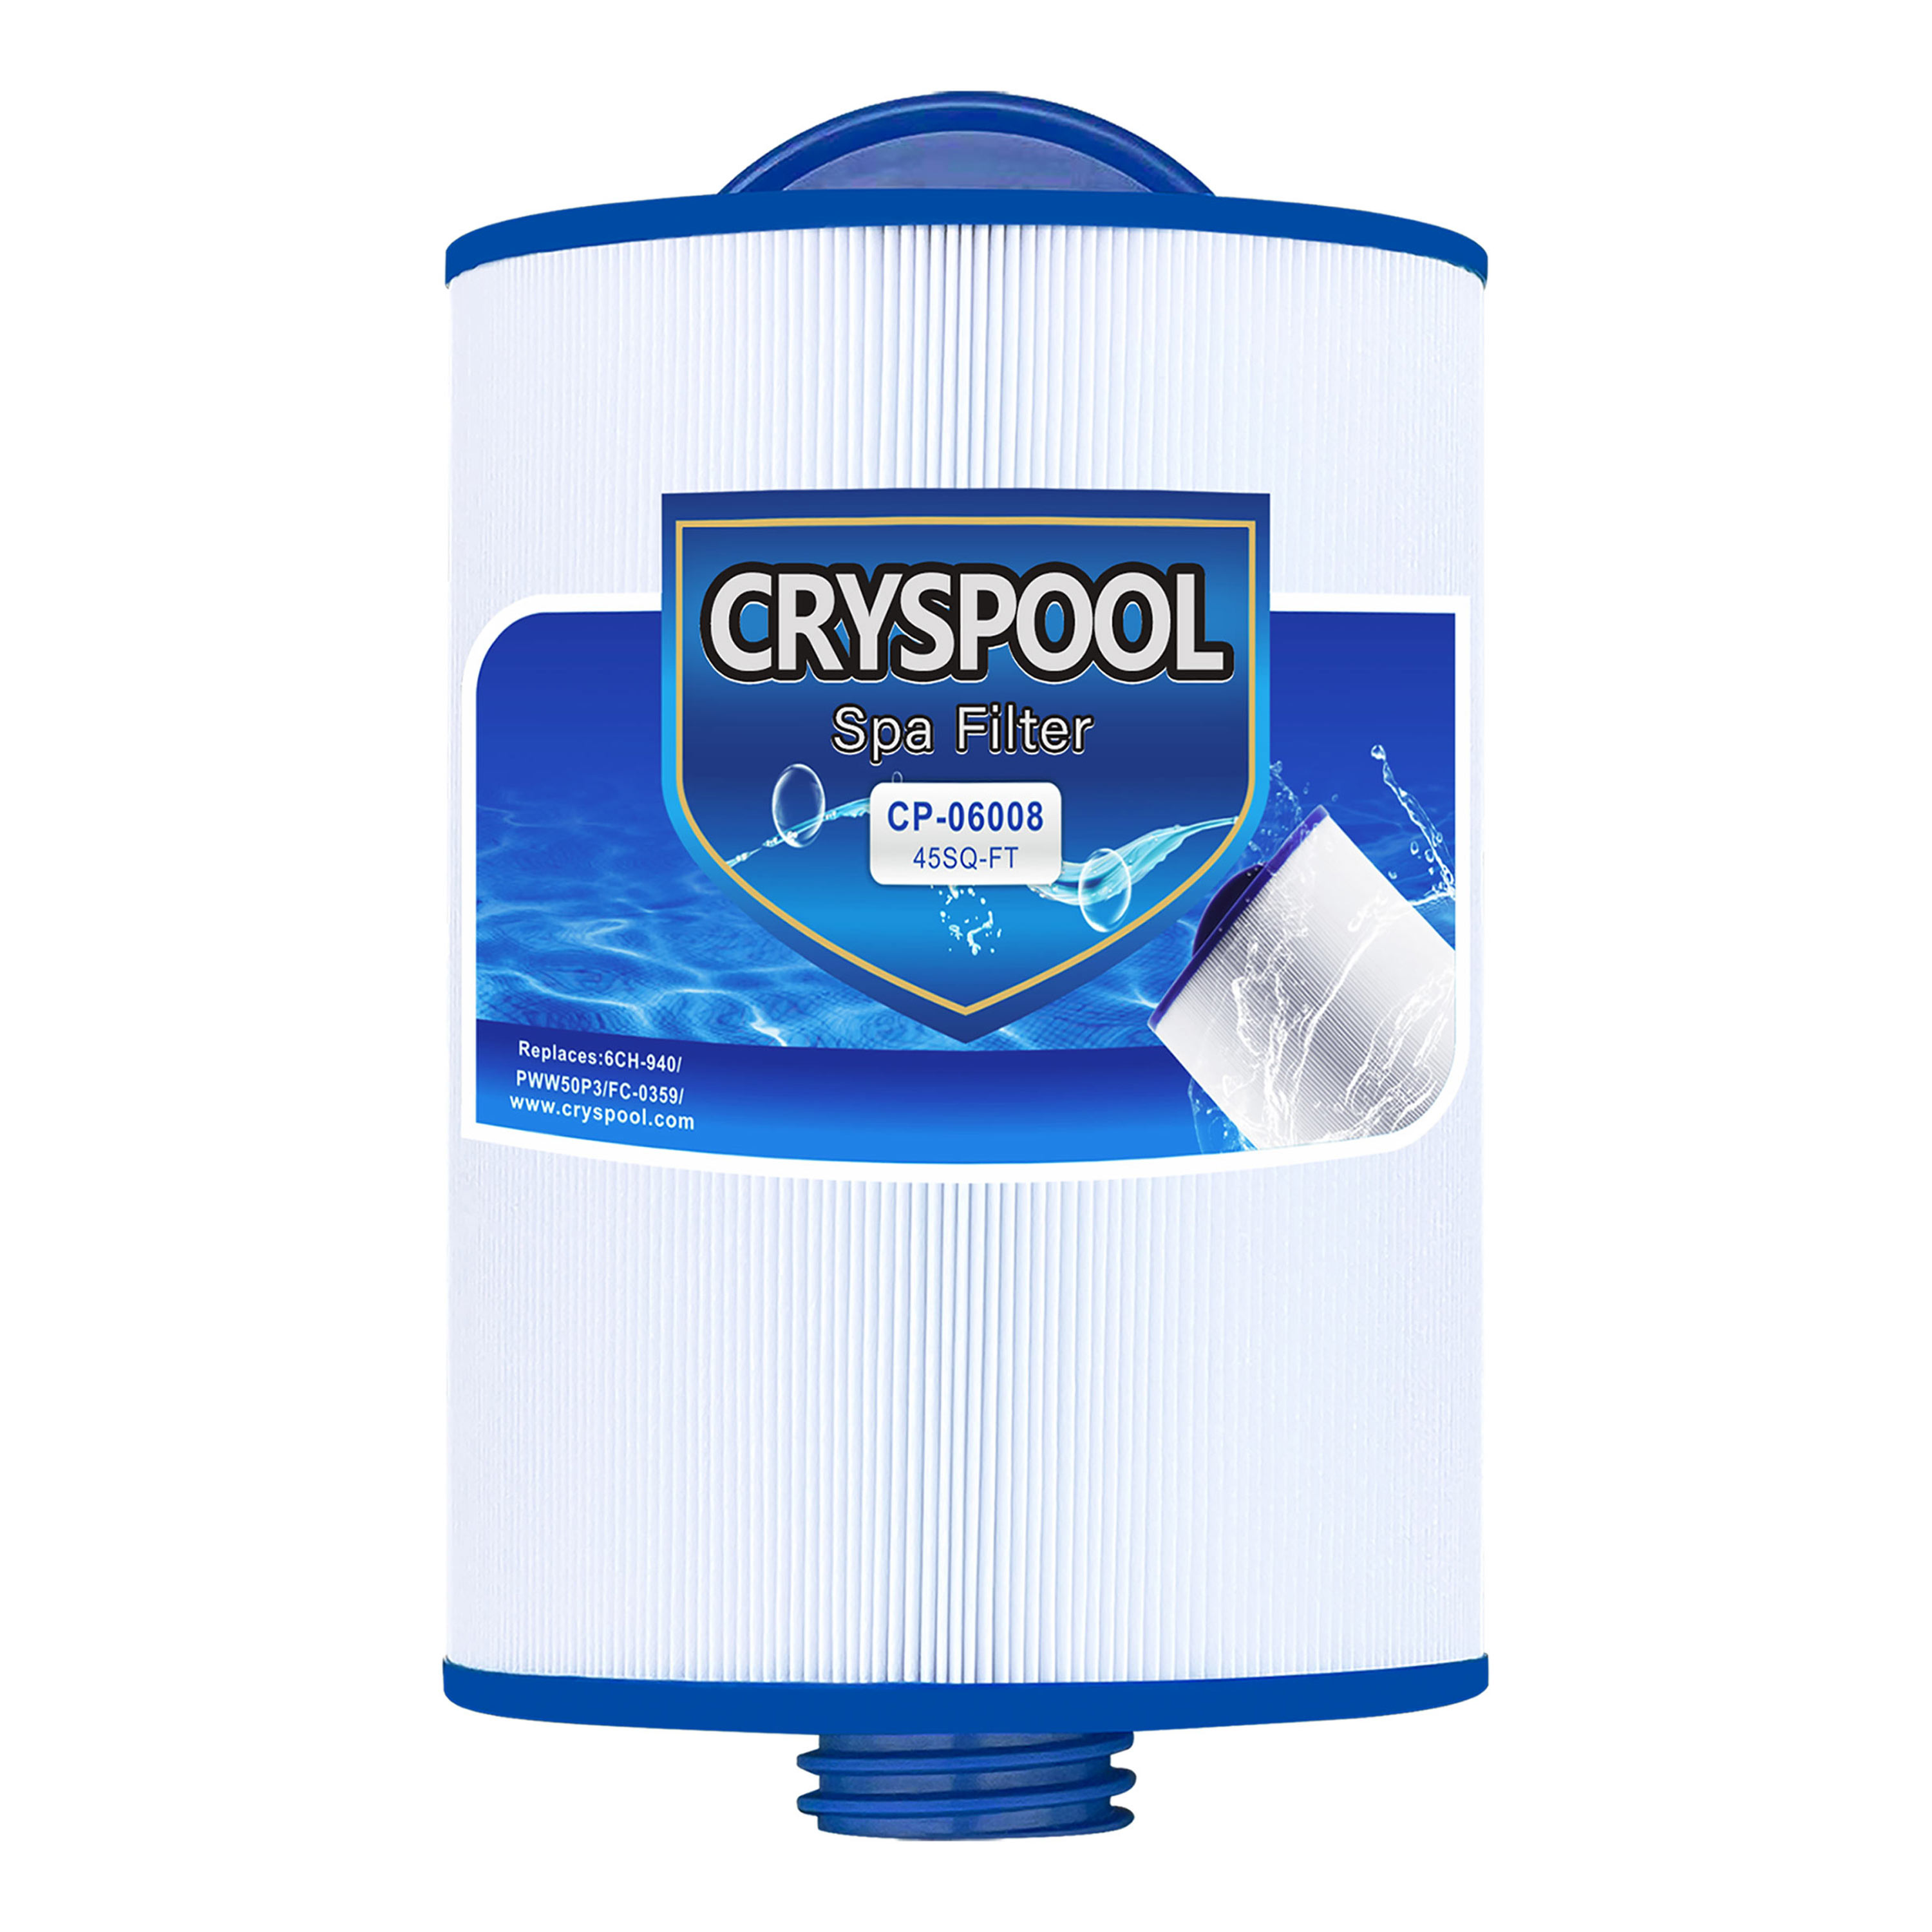 Reasonable price for C 6430 Filter - Cryspool Coarse-Thread Spa Filter Replaces 6CH-940, PWW50P3 (NOT PWW50P4), Filbur FC-0359, Waterway Vita Aber,Viking Spa Hot Tub Filter, 45 Sq.Ft. – Crys...